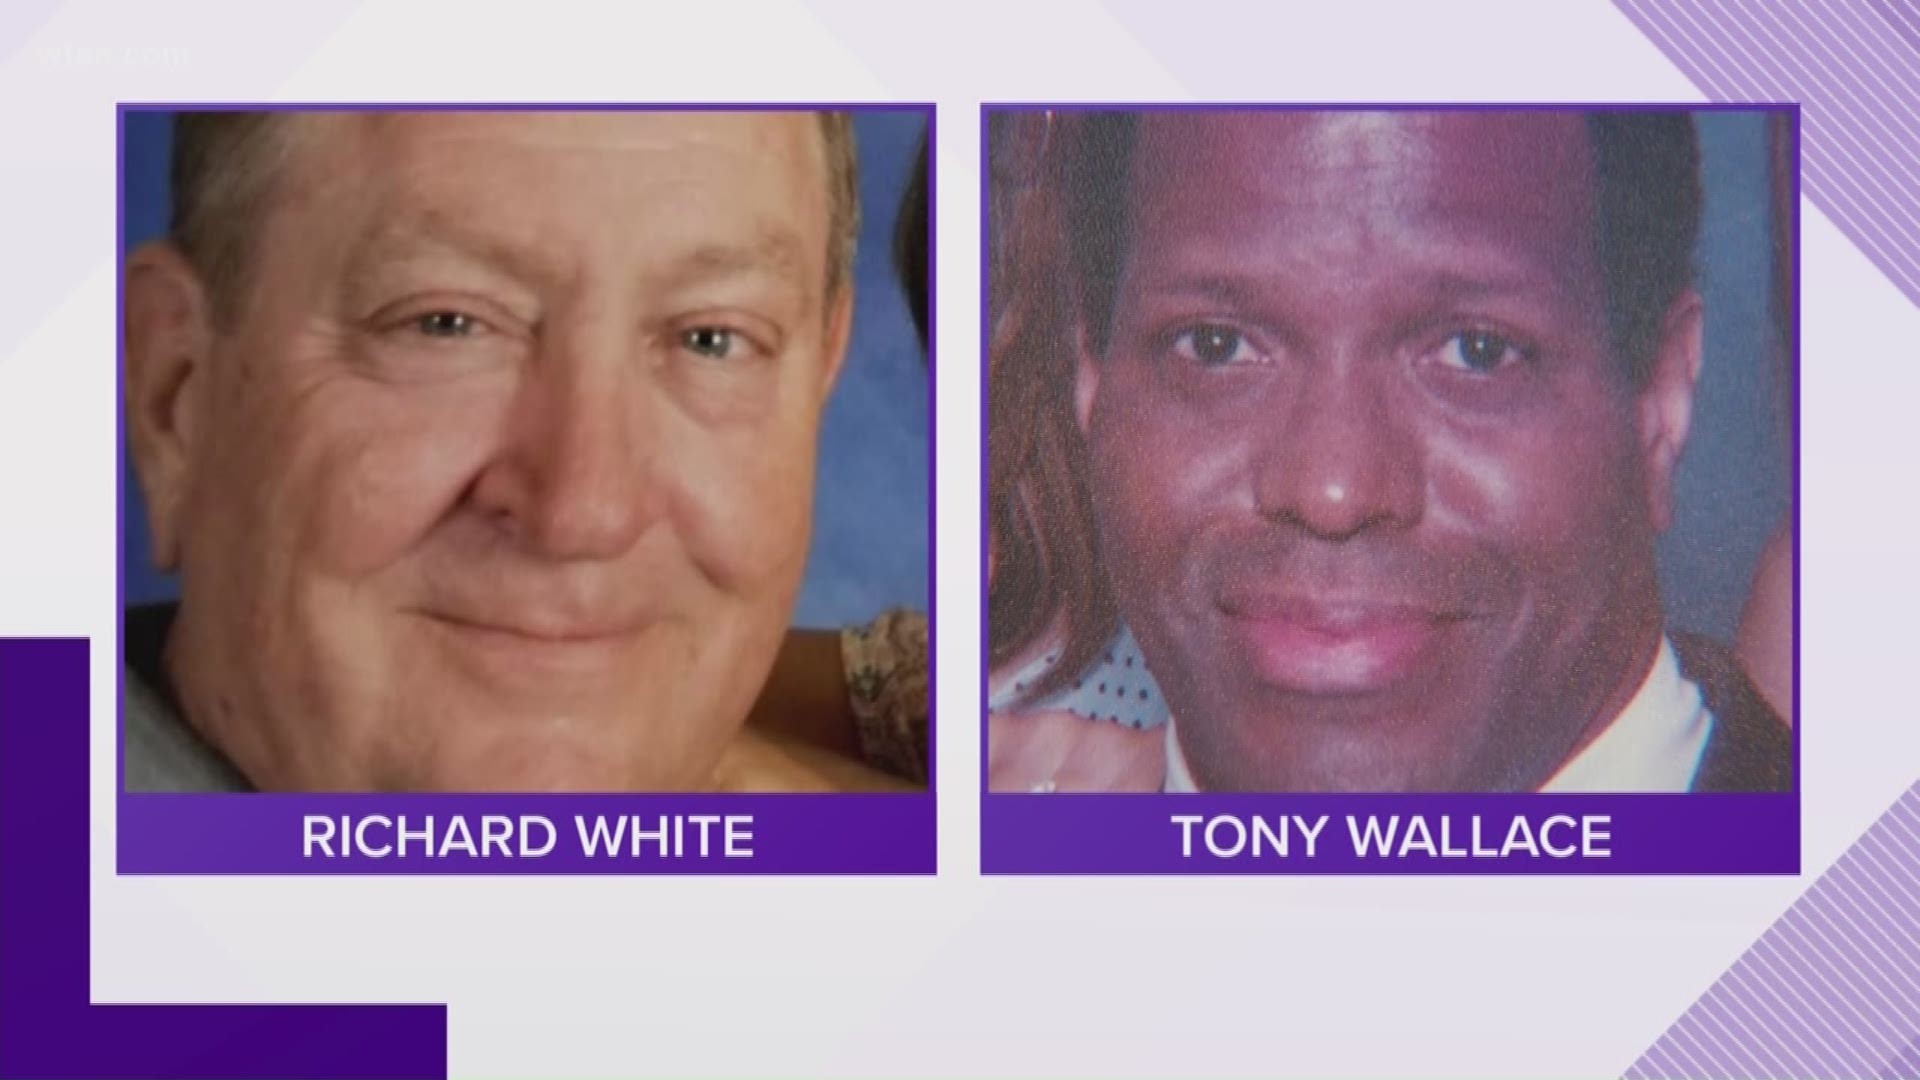 Two congregants — 67-year-old Richard White of River Oaks and 64-year-old Tony Wallace of Fort Worth — were shot and killed Sunday.